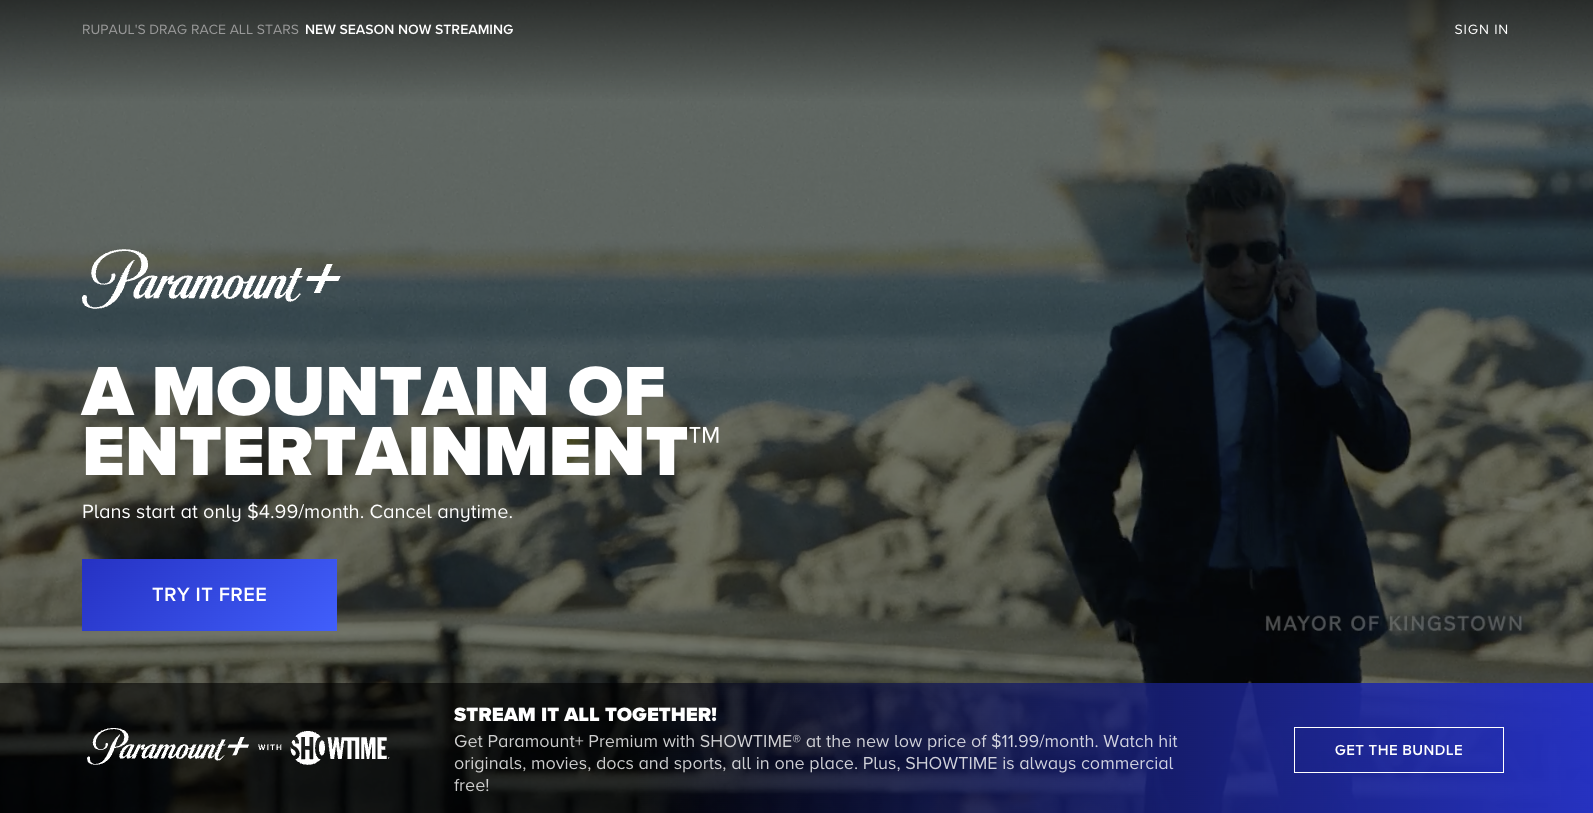 Paramount Plus is a streaming service that offers a wide variety of content, including movies, TV shows, originals, and live sports.